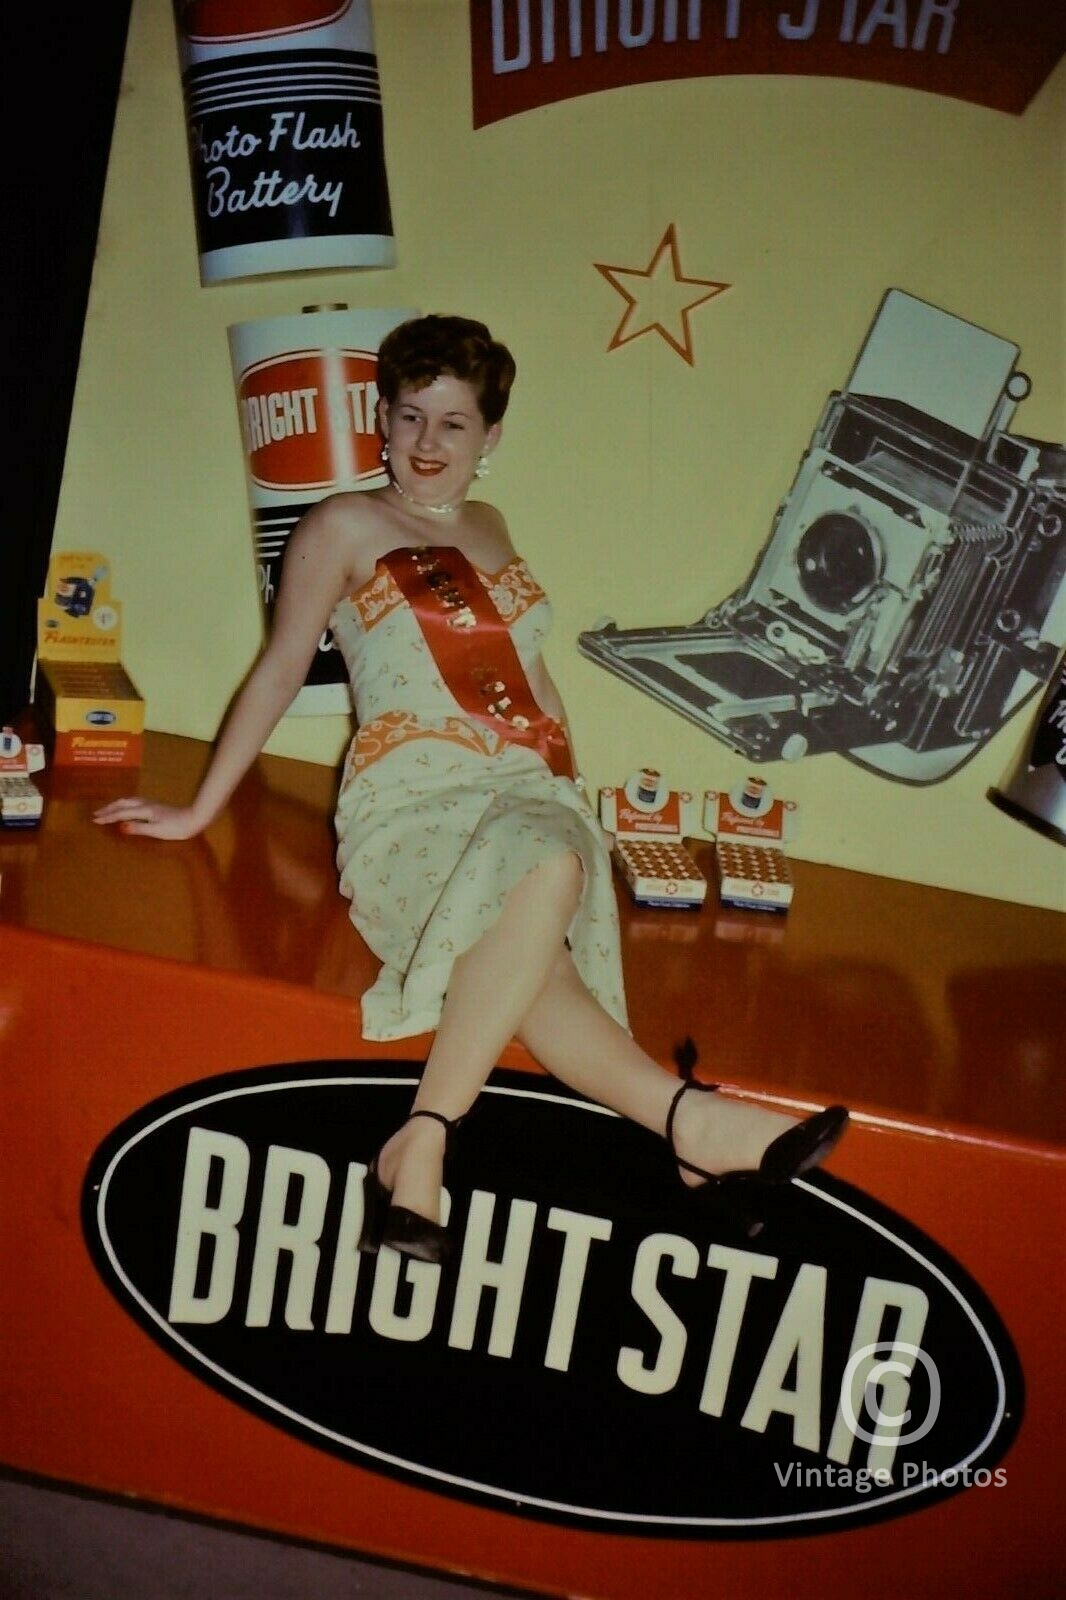 1950s Photographic Show with Model - Bright Star